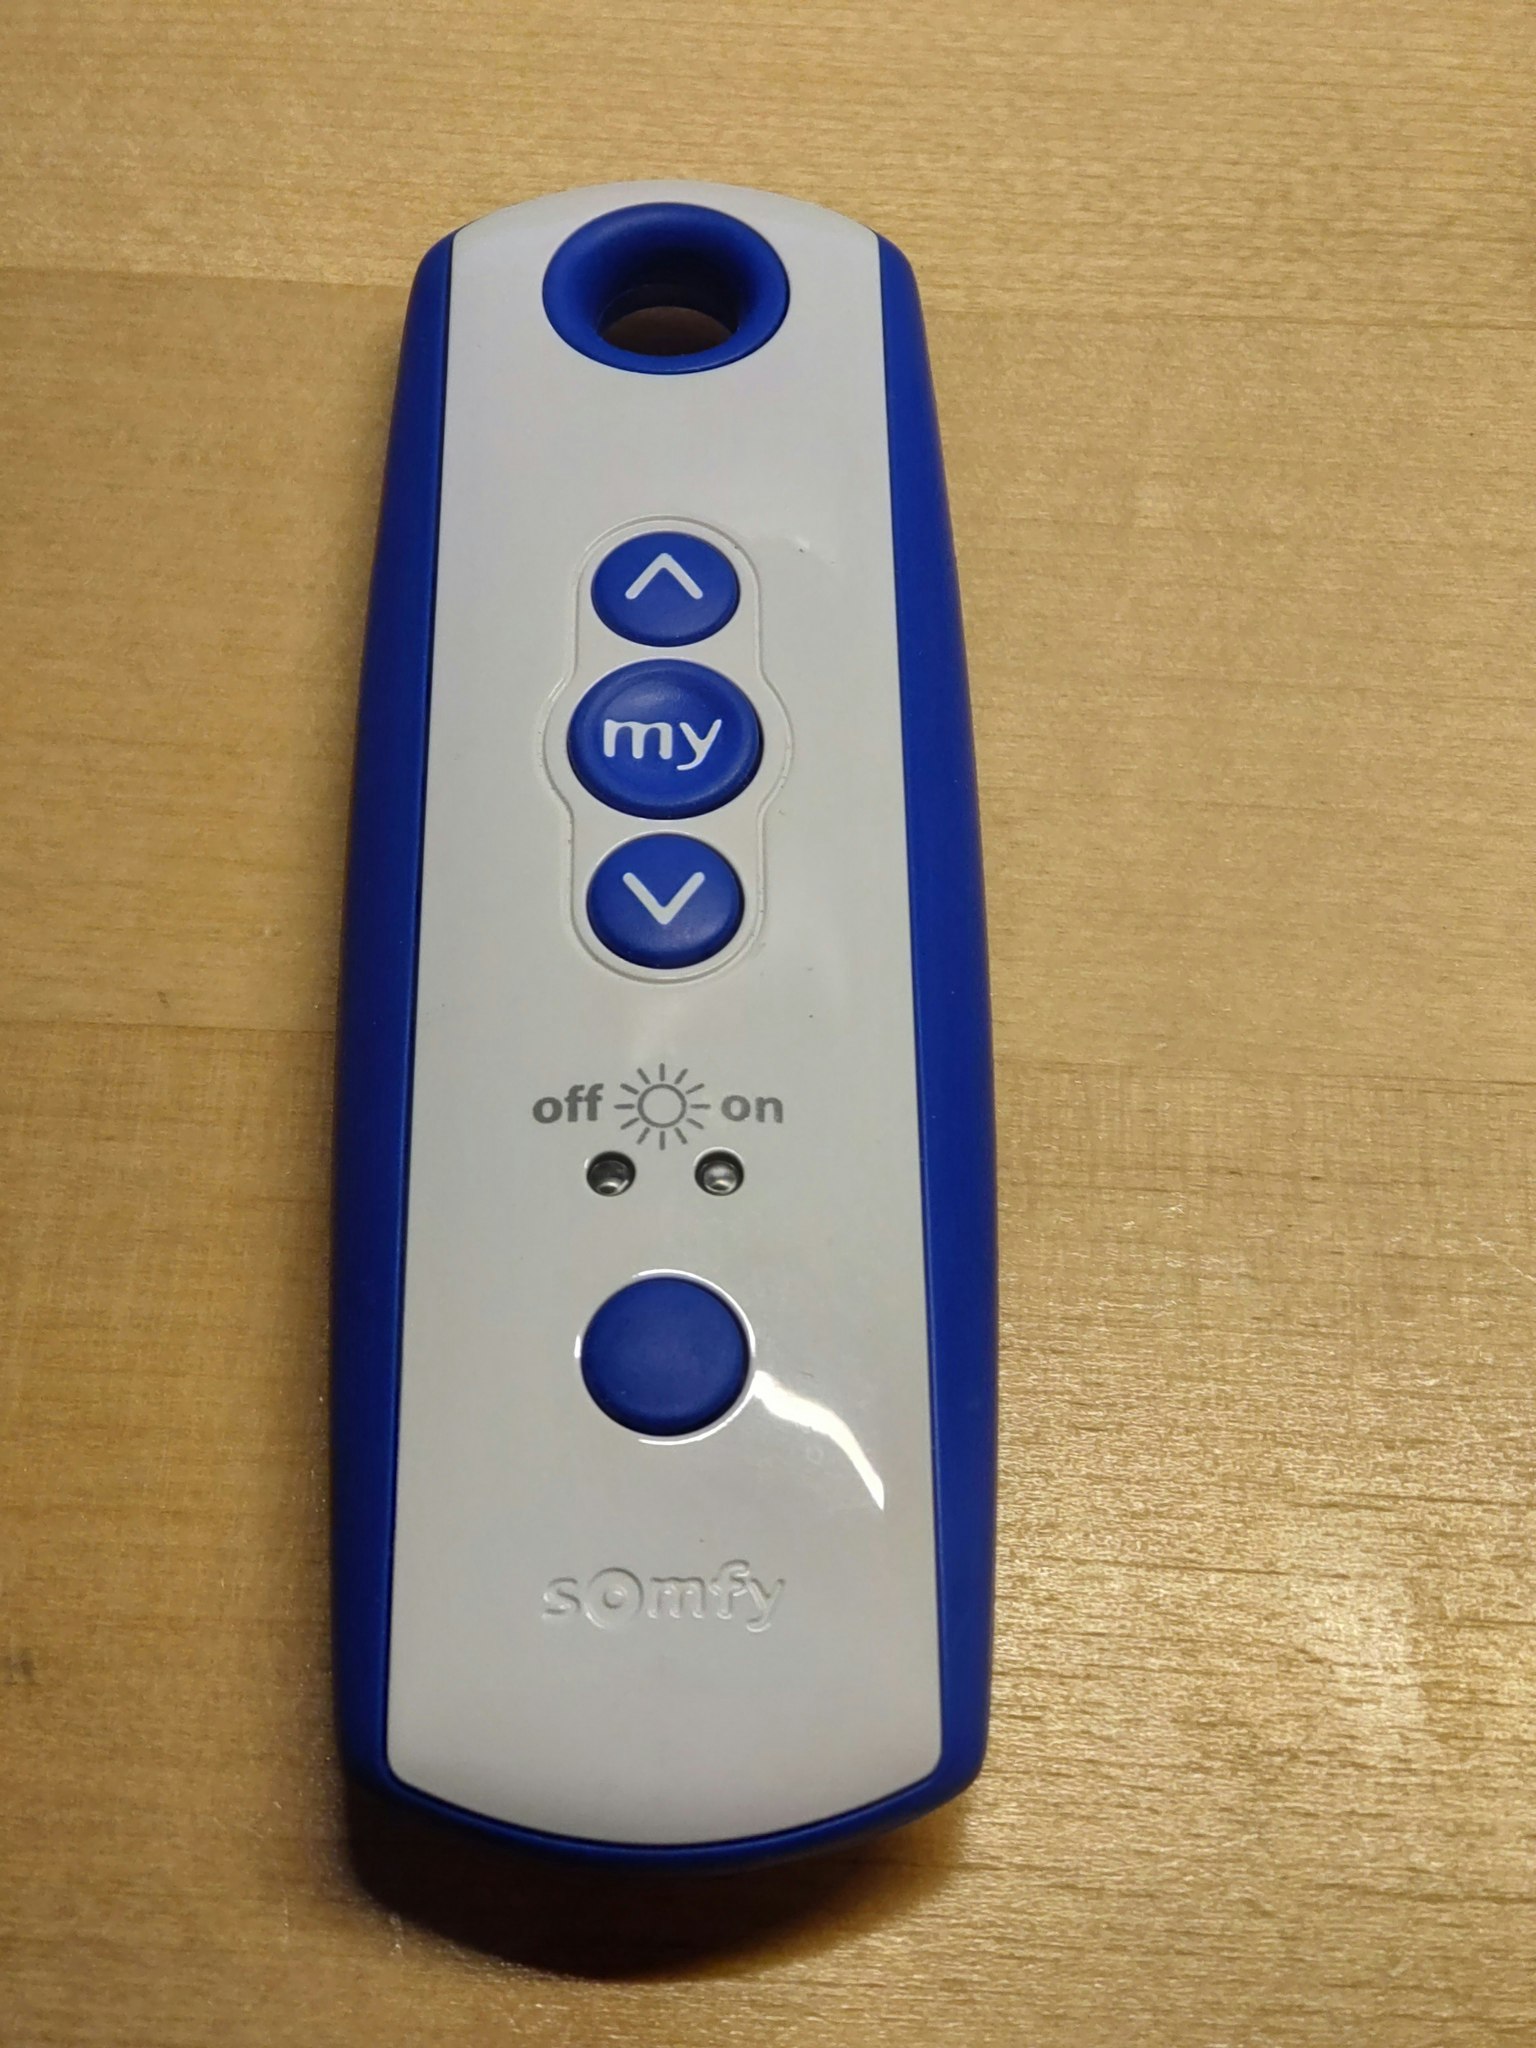 Somfy Telis 1 Soliris RTS-Pure Single Channel Remote Control Patio blue (pre owned)